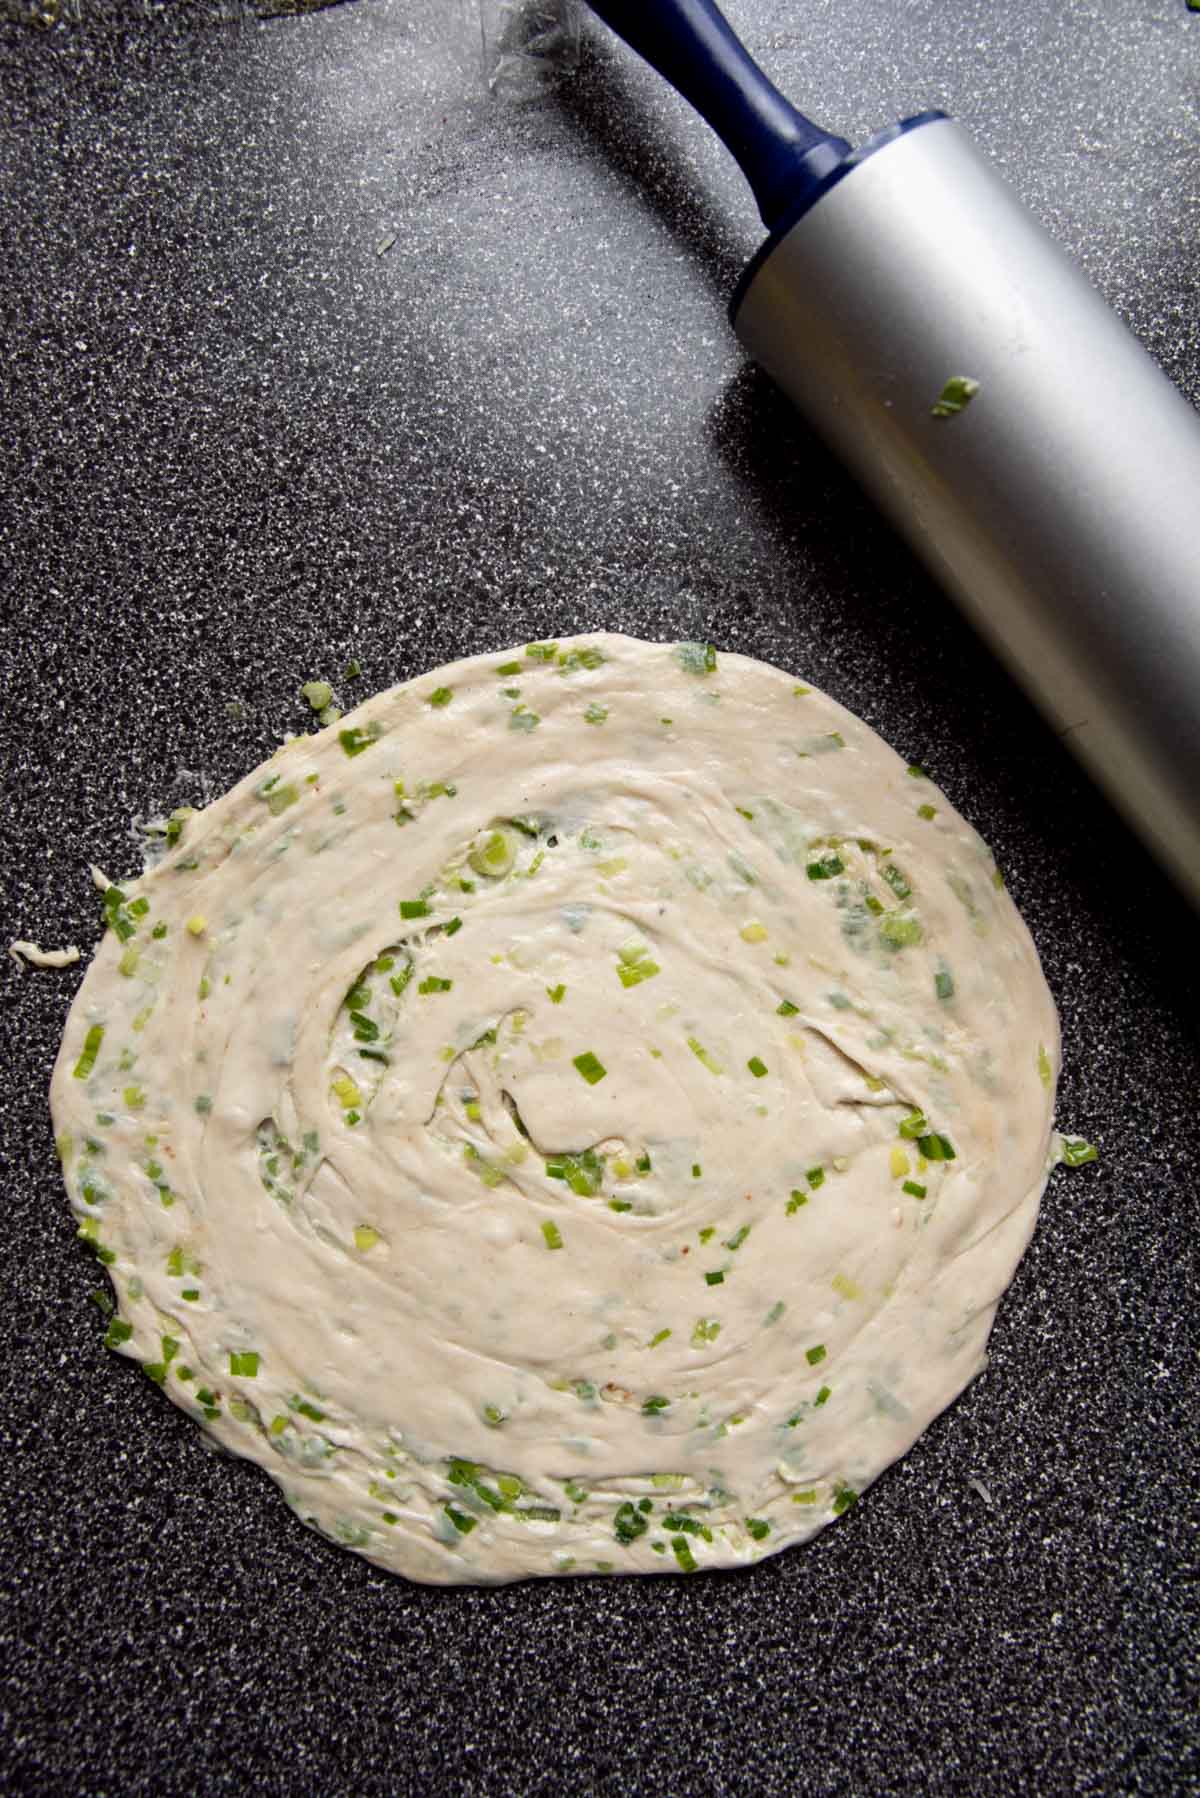 The coiled scallion pancake dough rolled out to a flat bread, with a rolling pin close by.